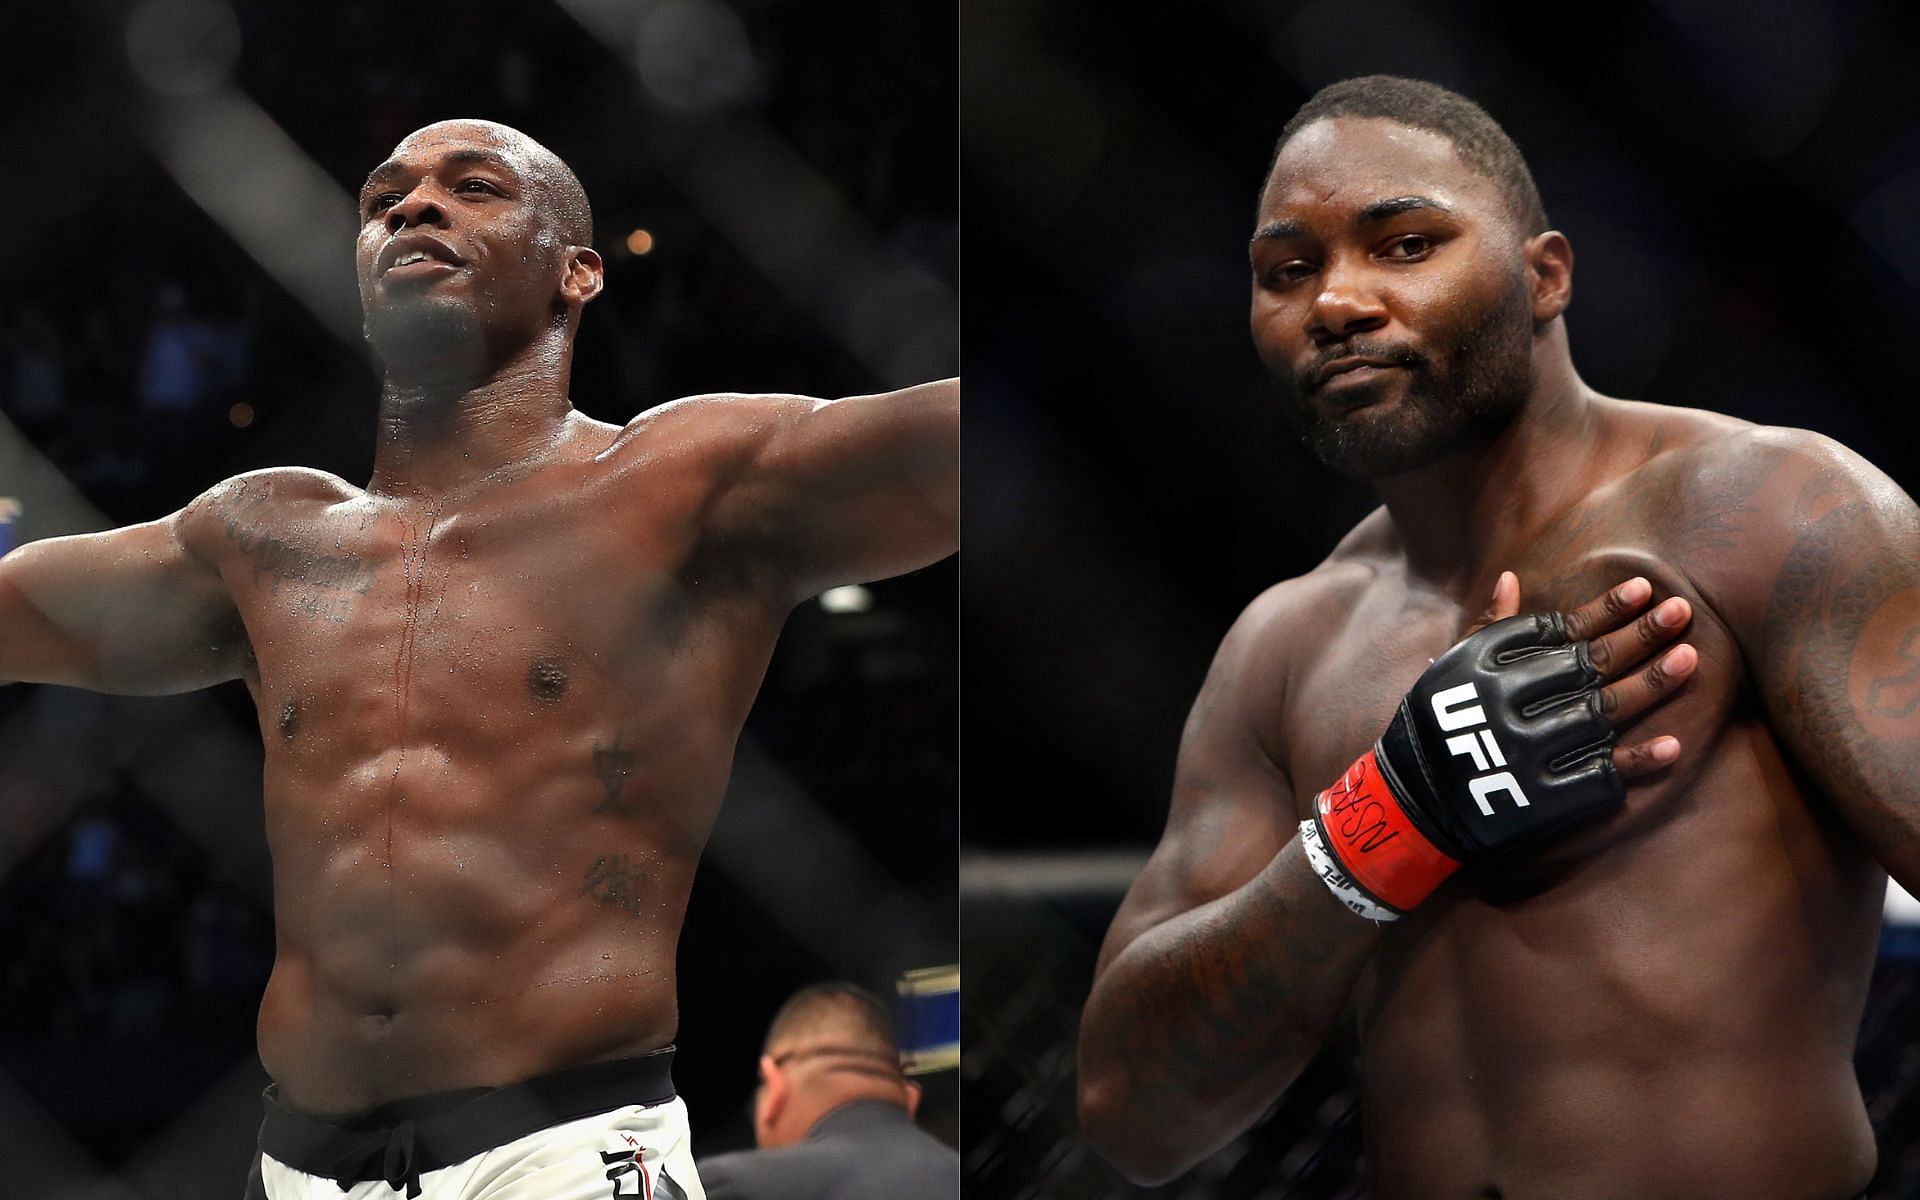 Jon Jones (left) and Anthony Johnson (right) (Image credits Getty Images)